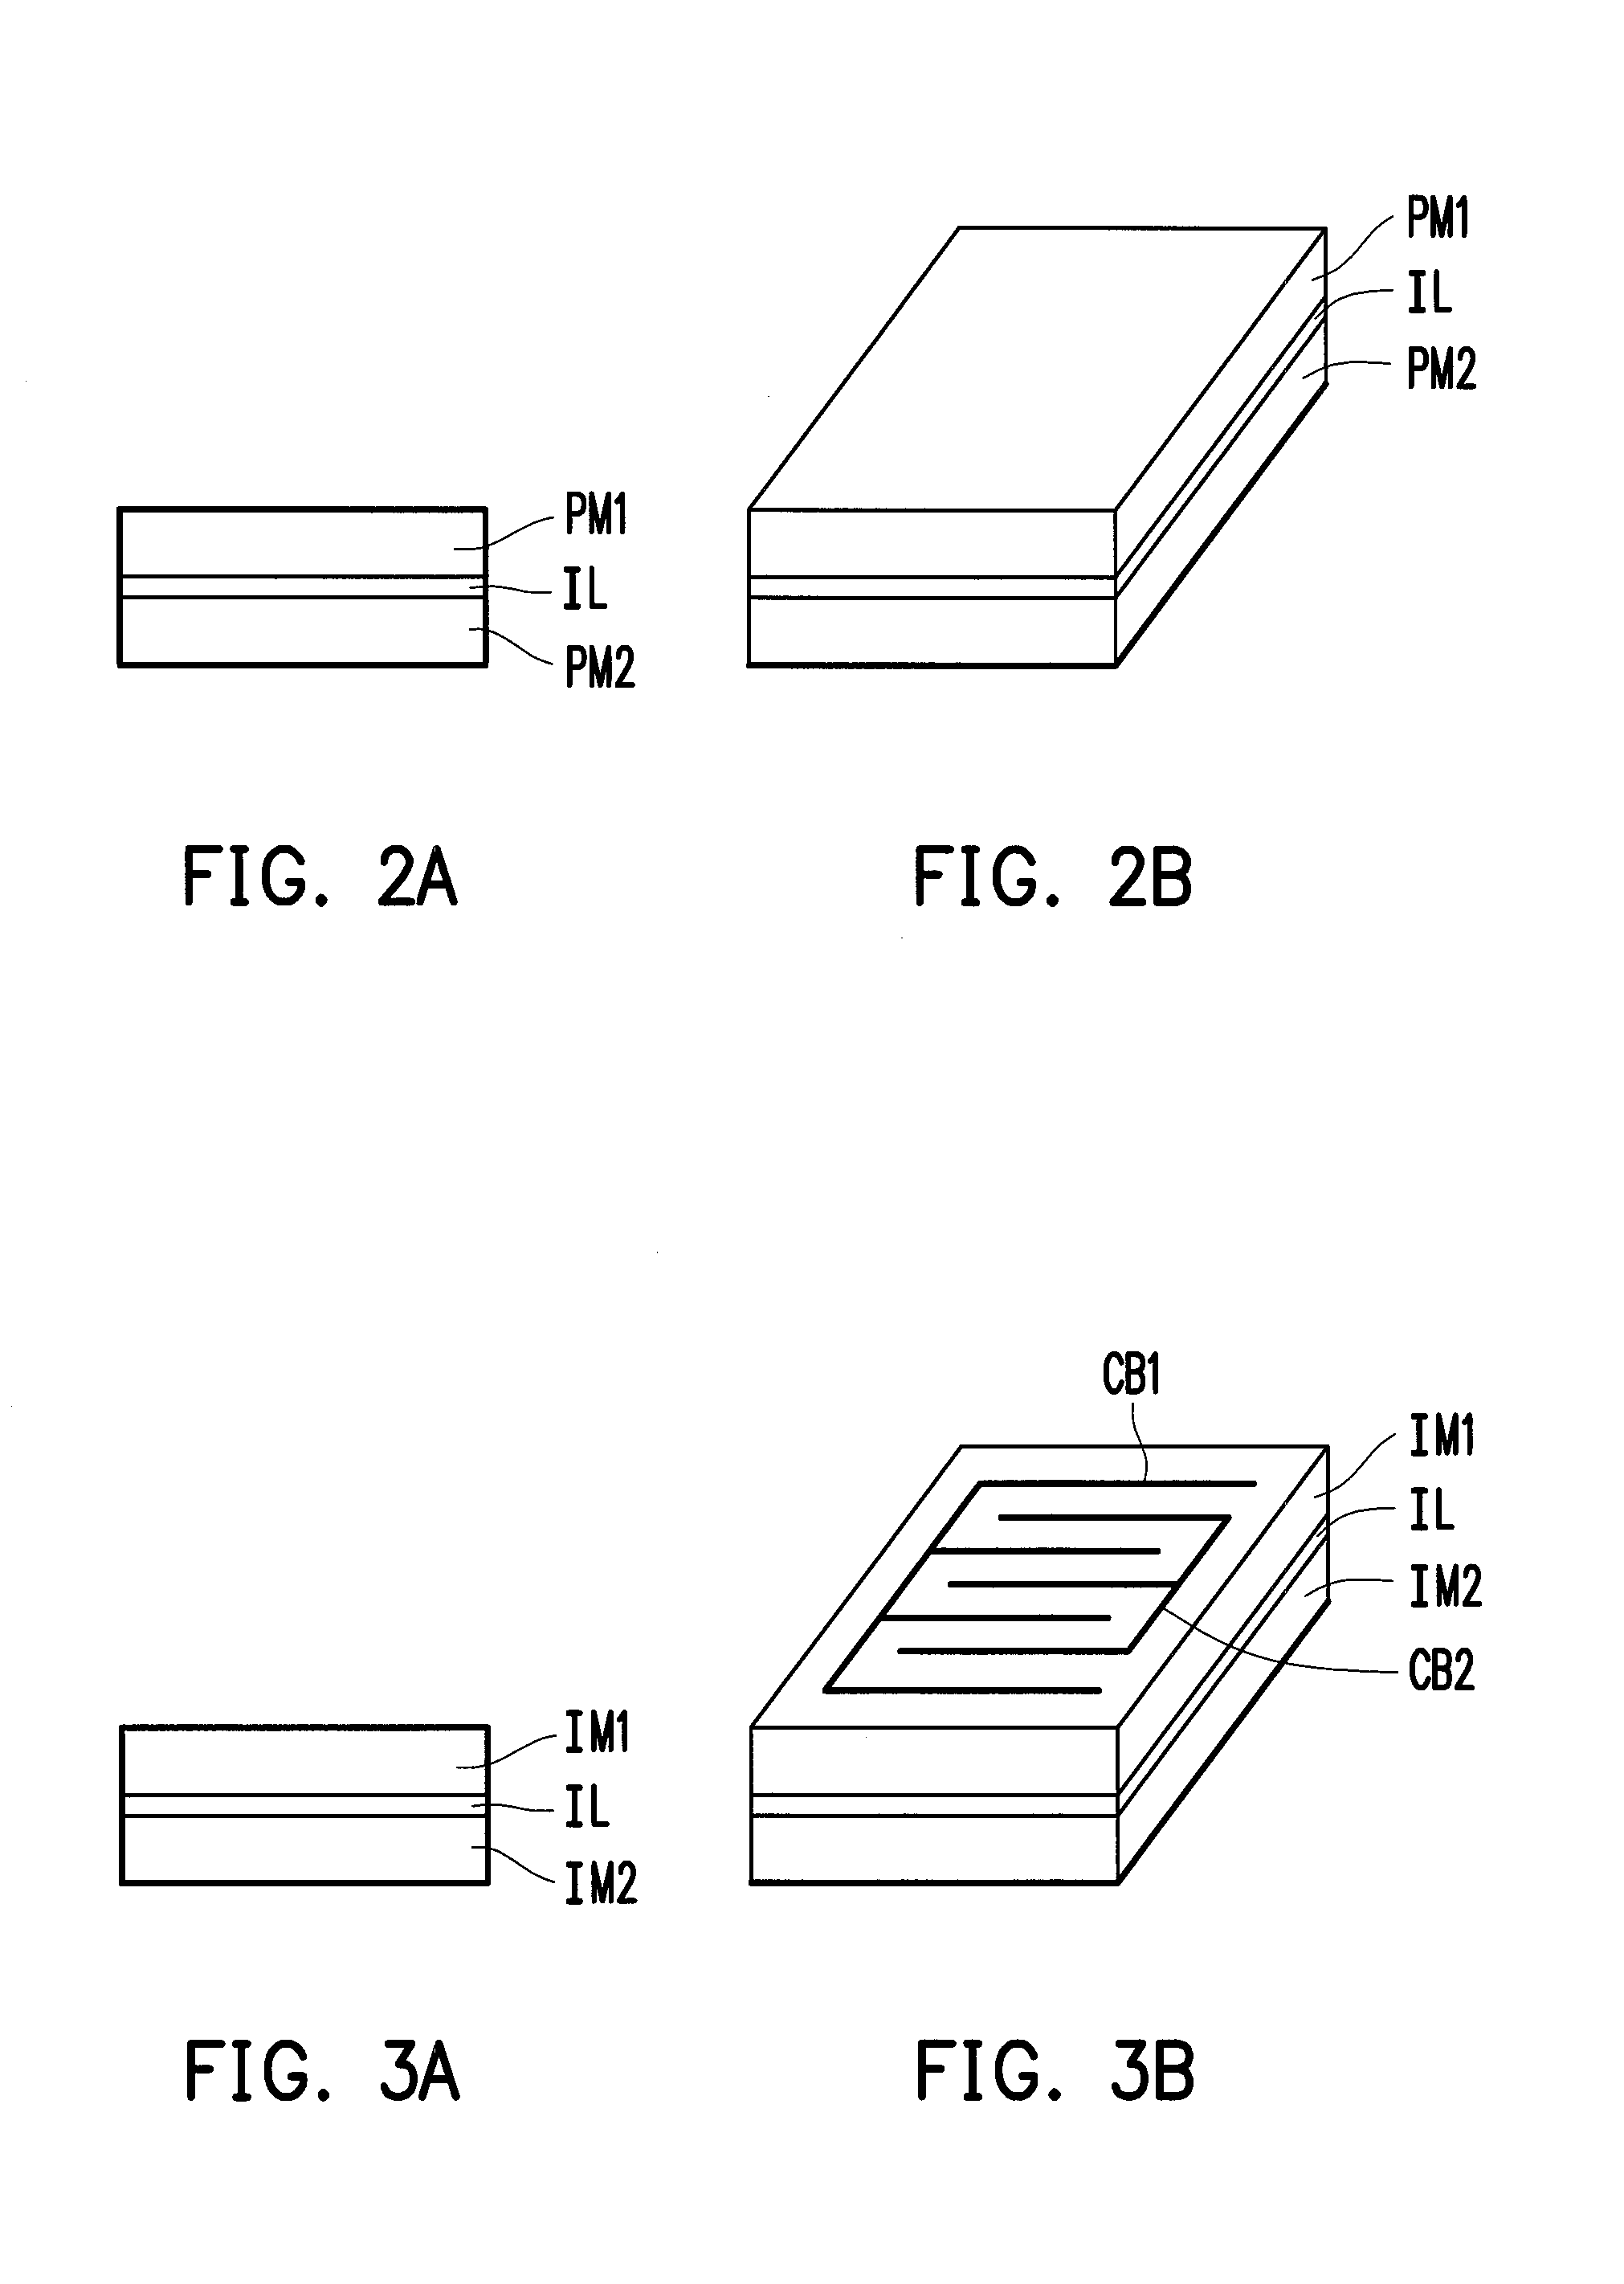 Capacitor structure applied to integrated circuit